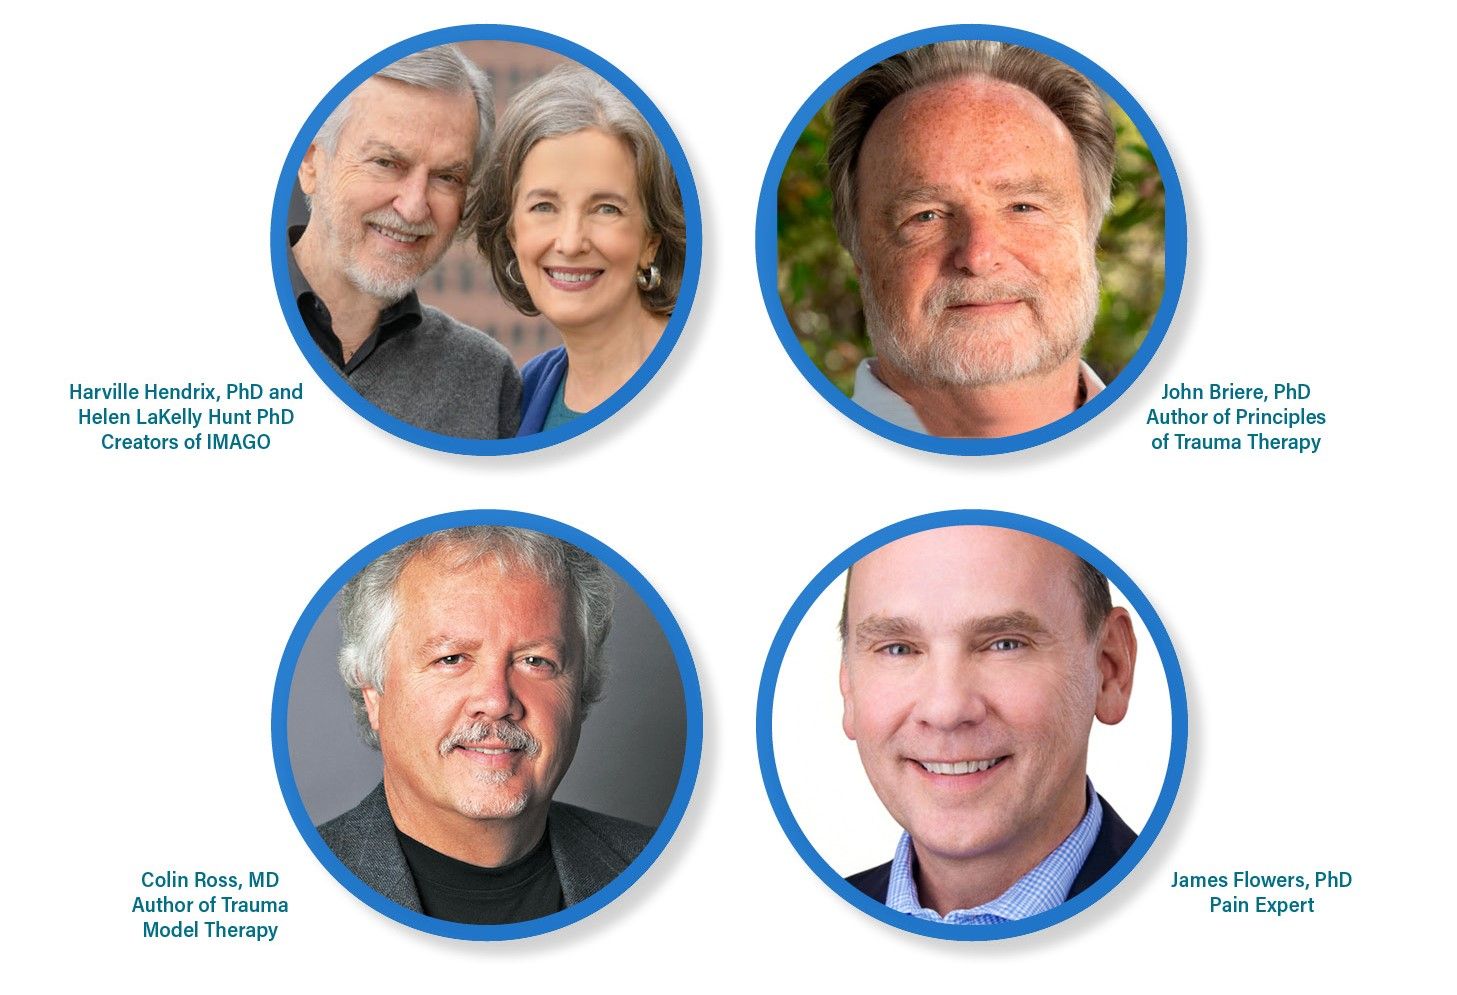 Harville Hendrix, PhD and Helen LaKelly Hunt PhD, Creators of IMAGO; John Briere PhD, Author of Principles of Trauma Therapy; Colin Ross MD, Author of Trauma Model Therapy; James Flowers PhD, Pain Expert